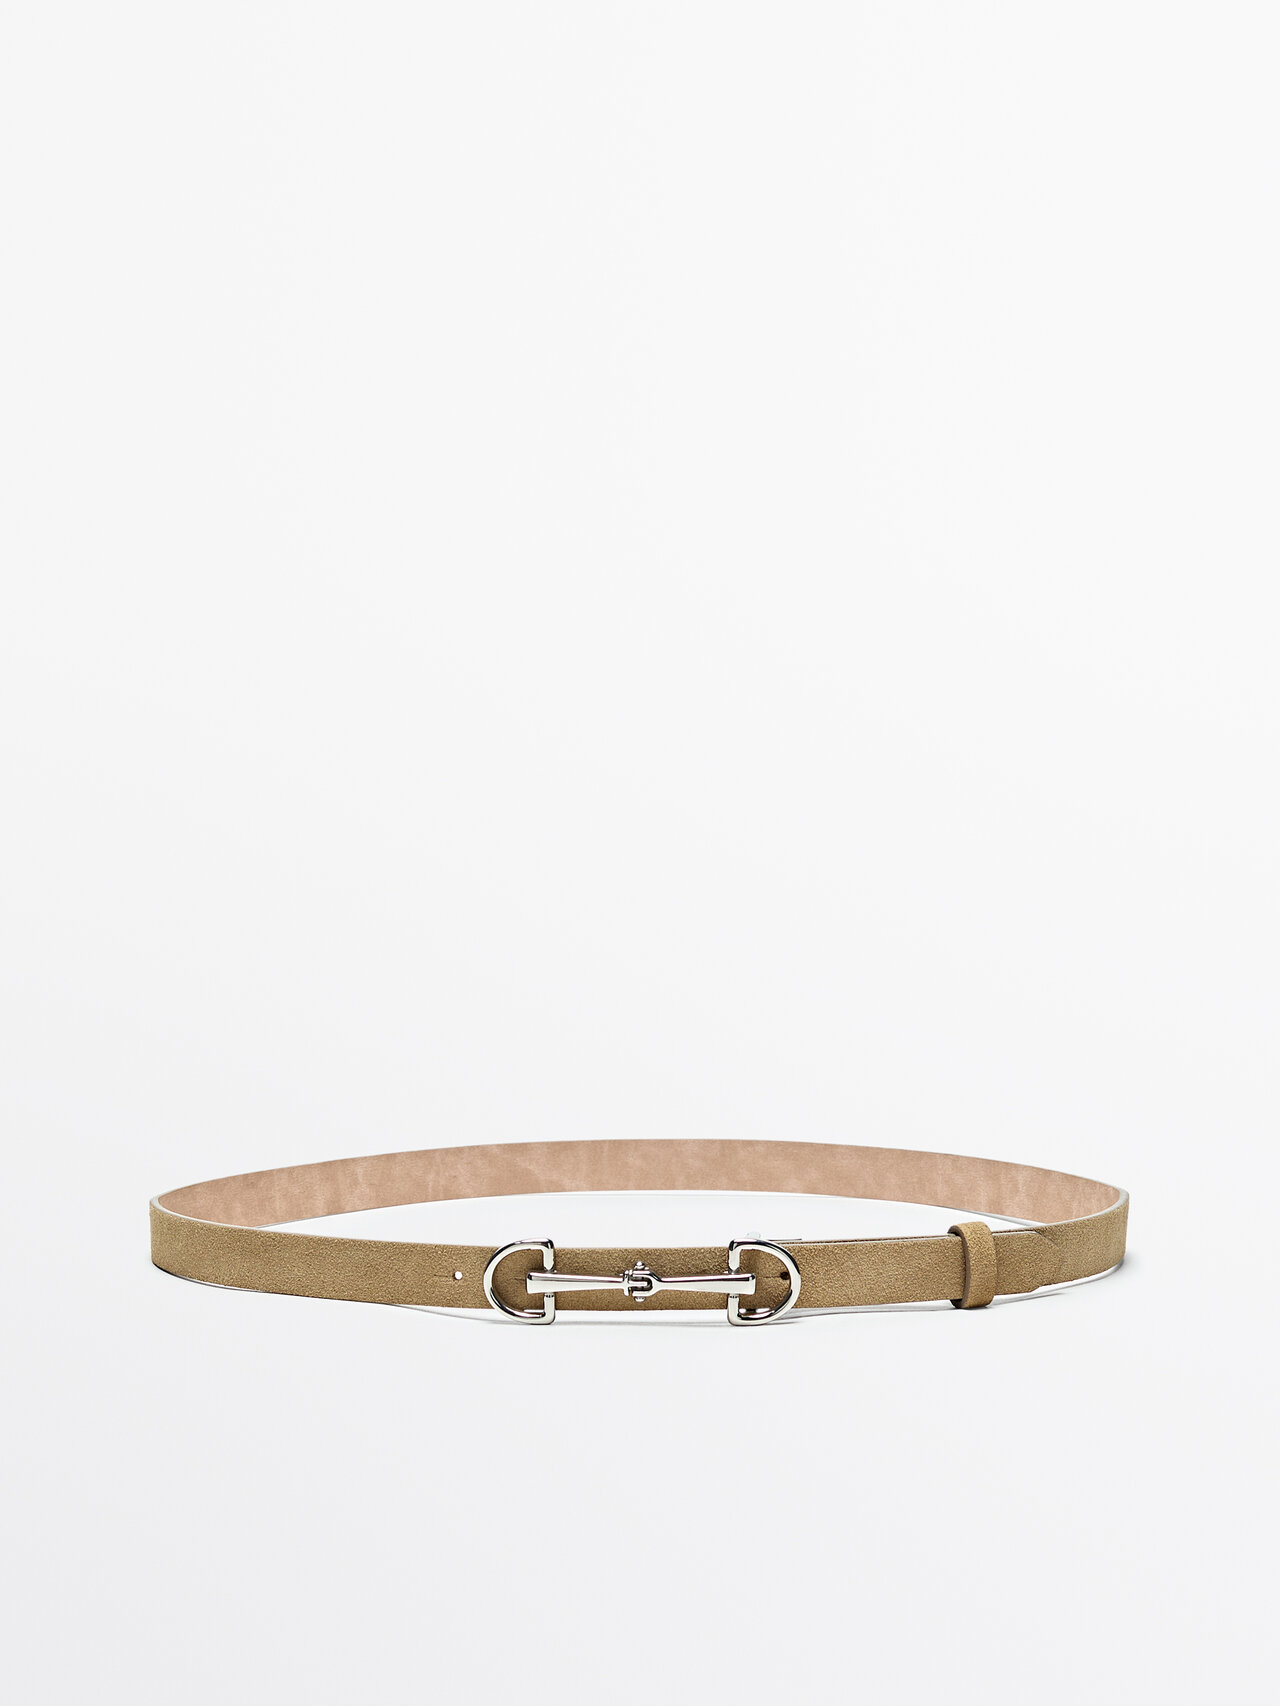 Massimo Dutti Split Leather Belt With Double Buckle In Sand